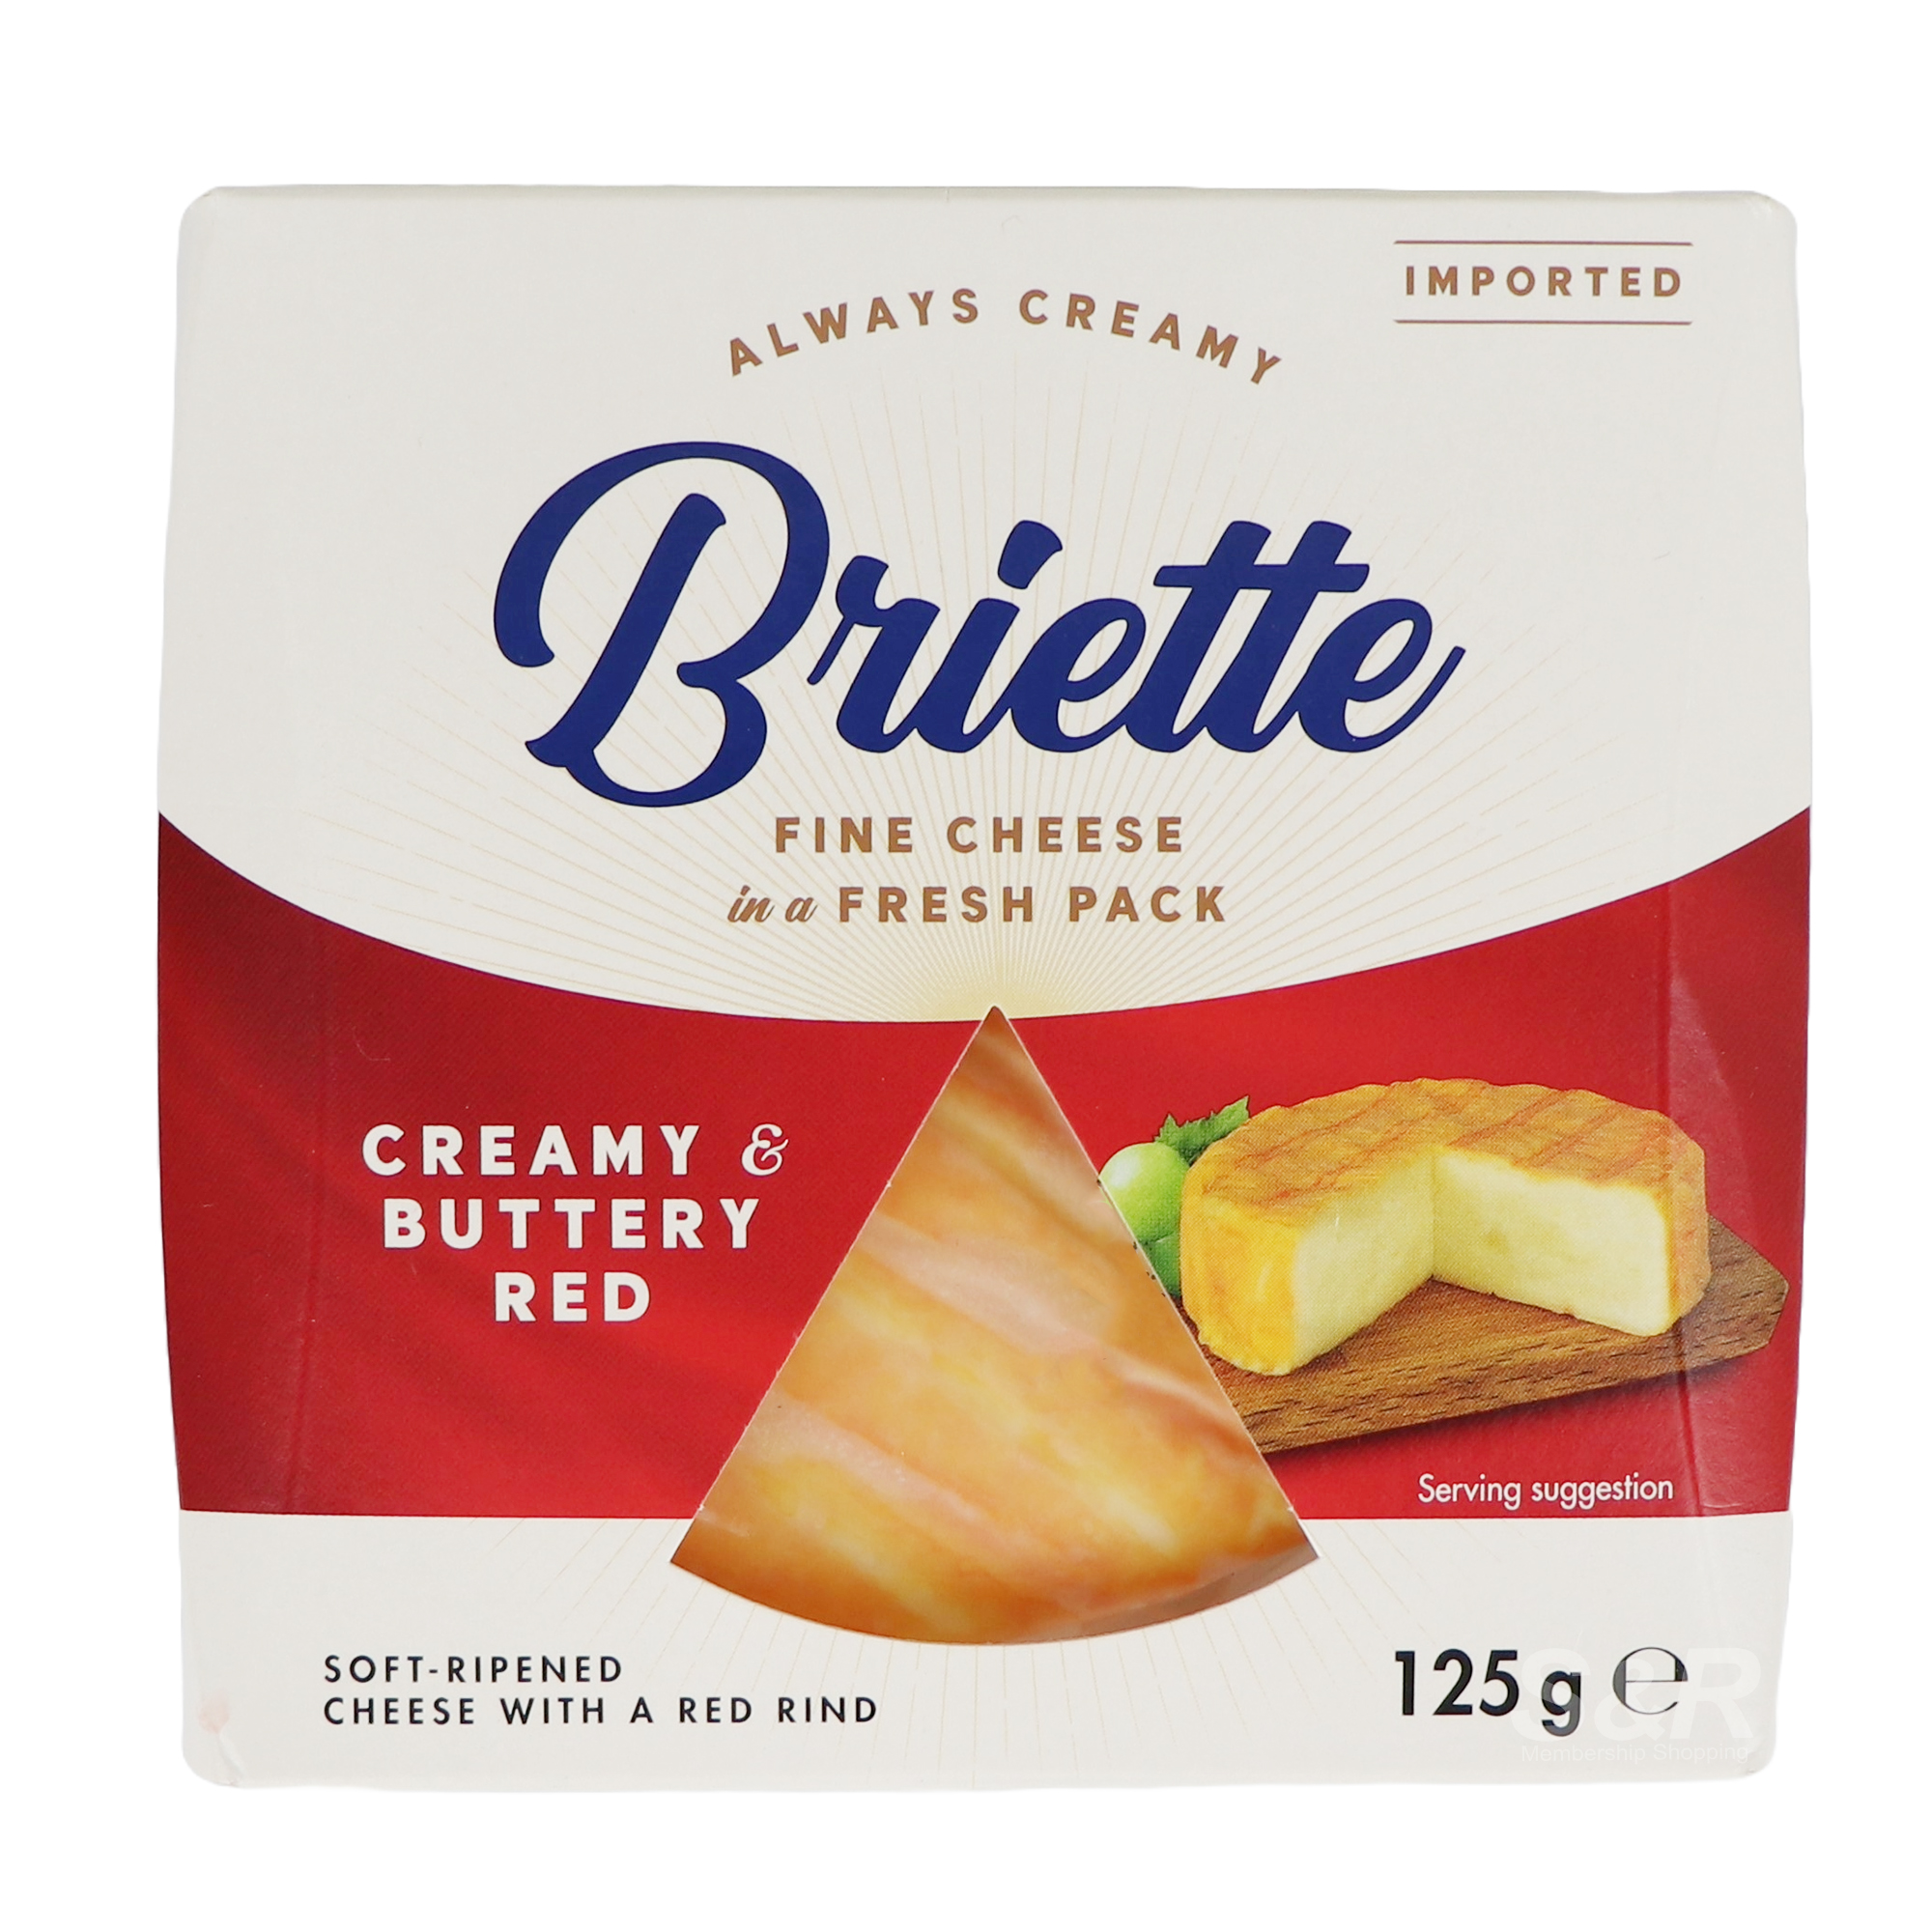 Briette Creamy And Buttery Red Soft-Ripened Cheese with A Red Pind 125g